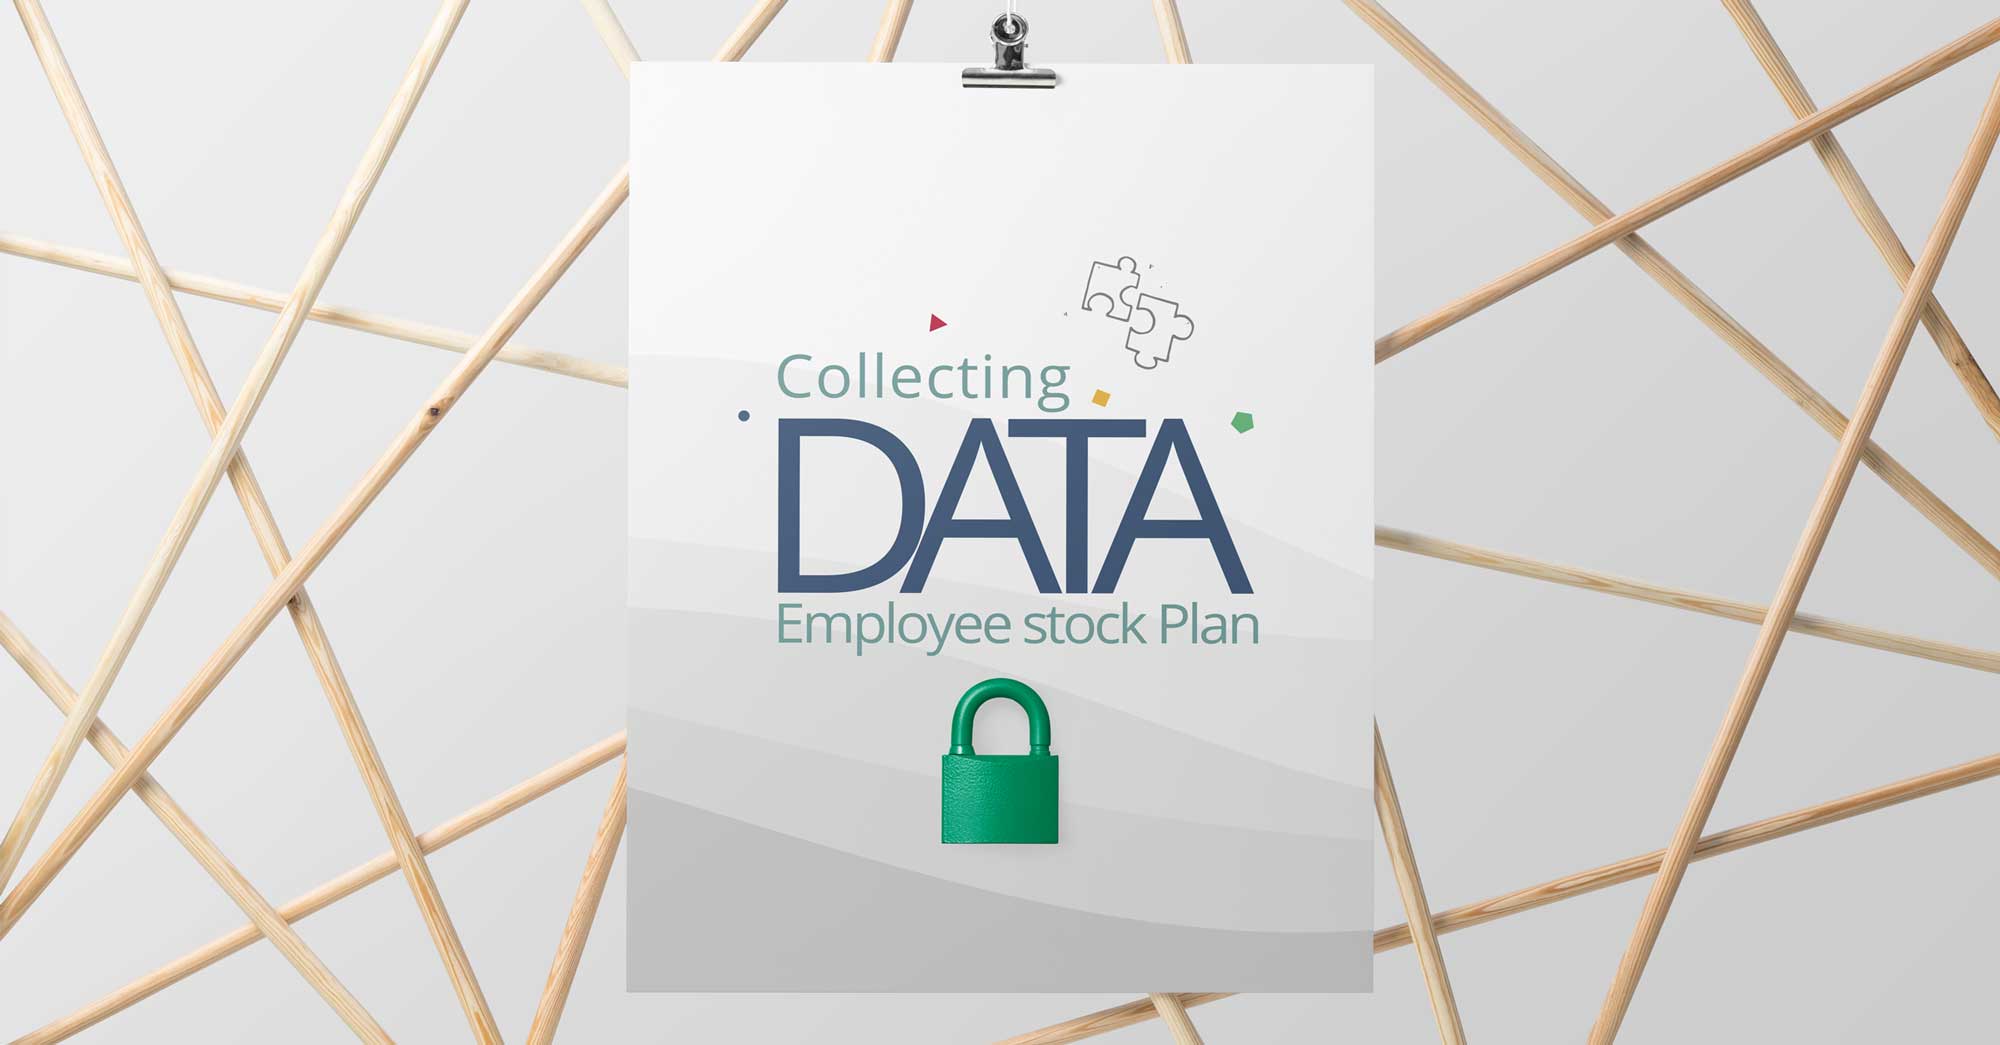 Top Tips How to Gather Data So Your Employee Stock Plans Run Smoothly